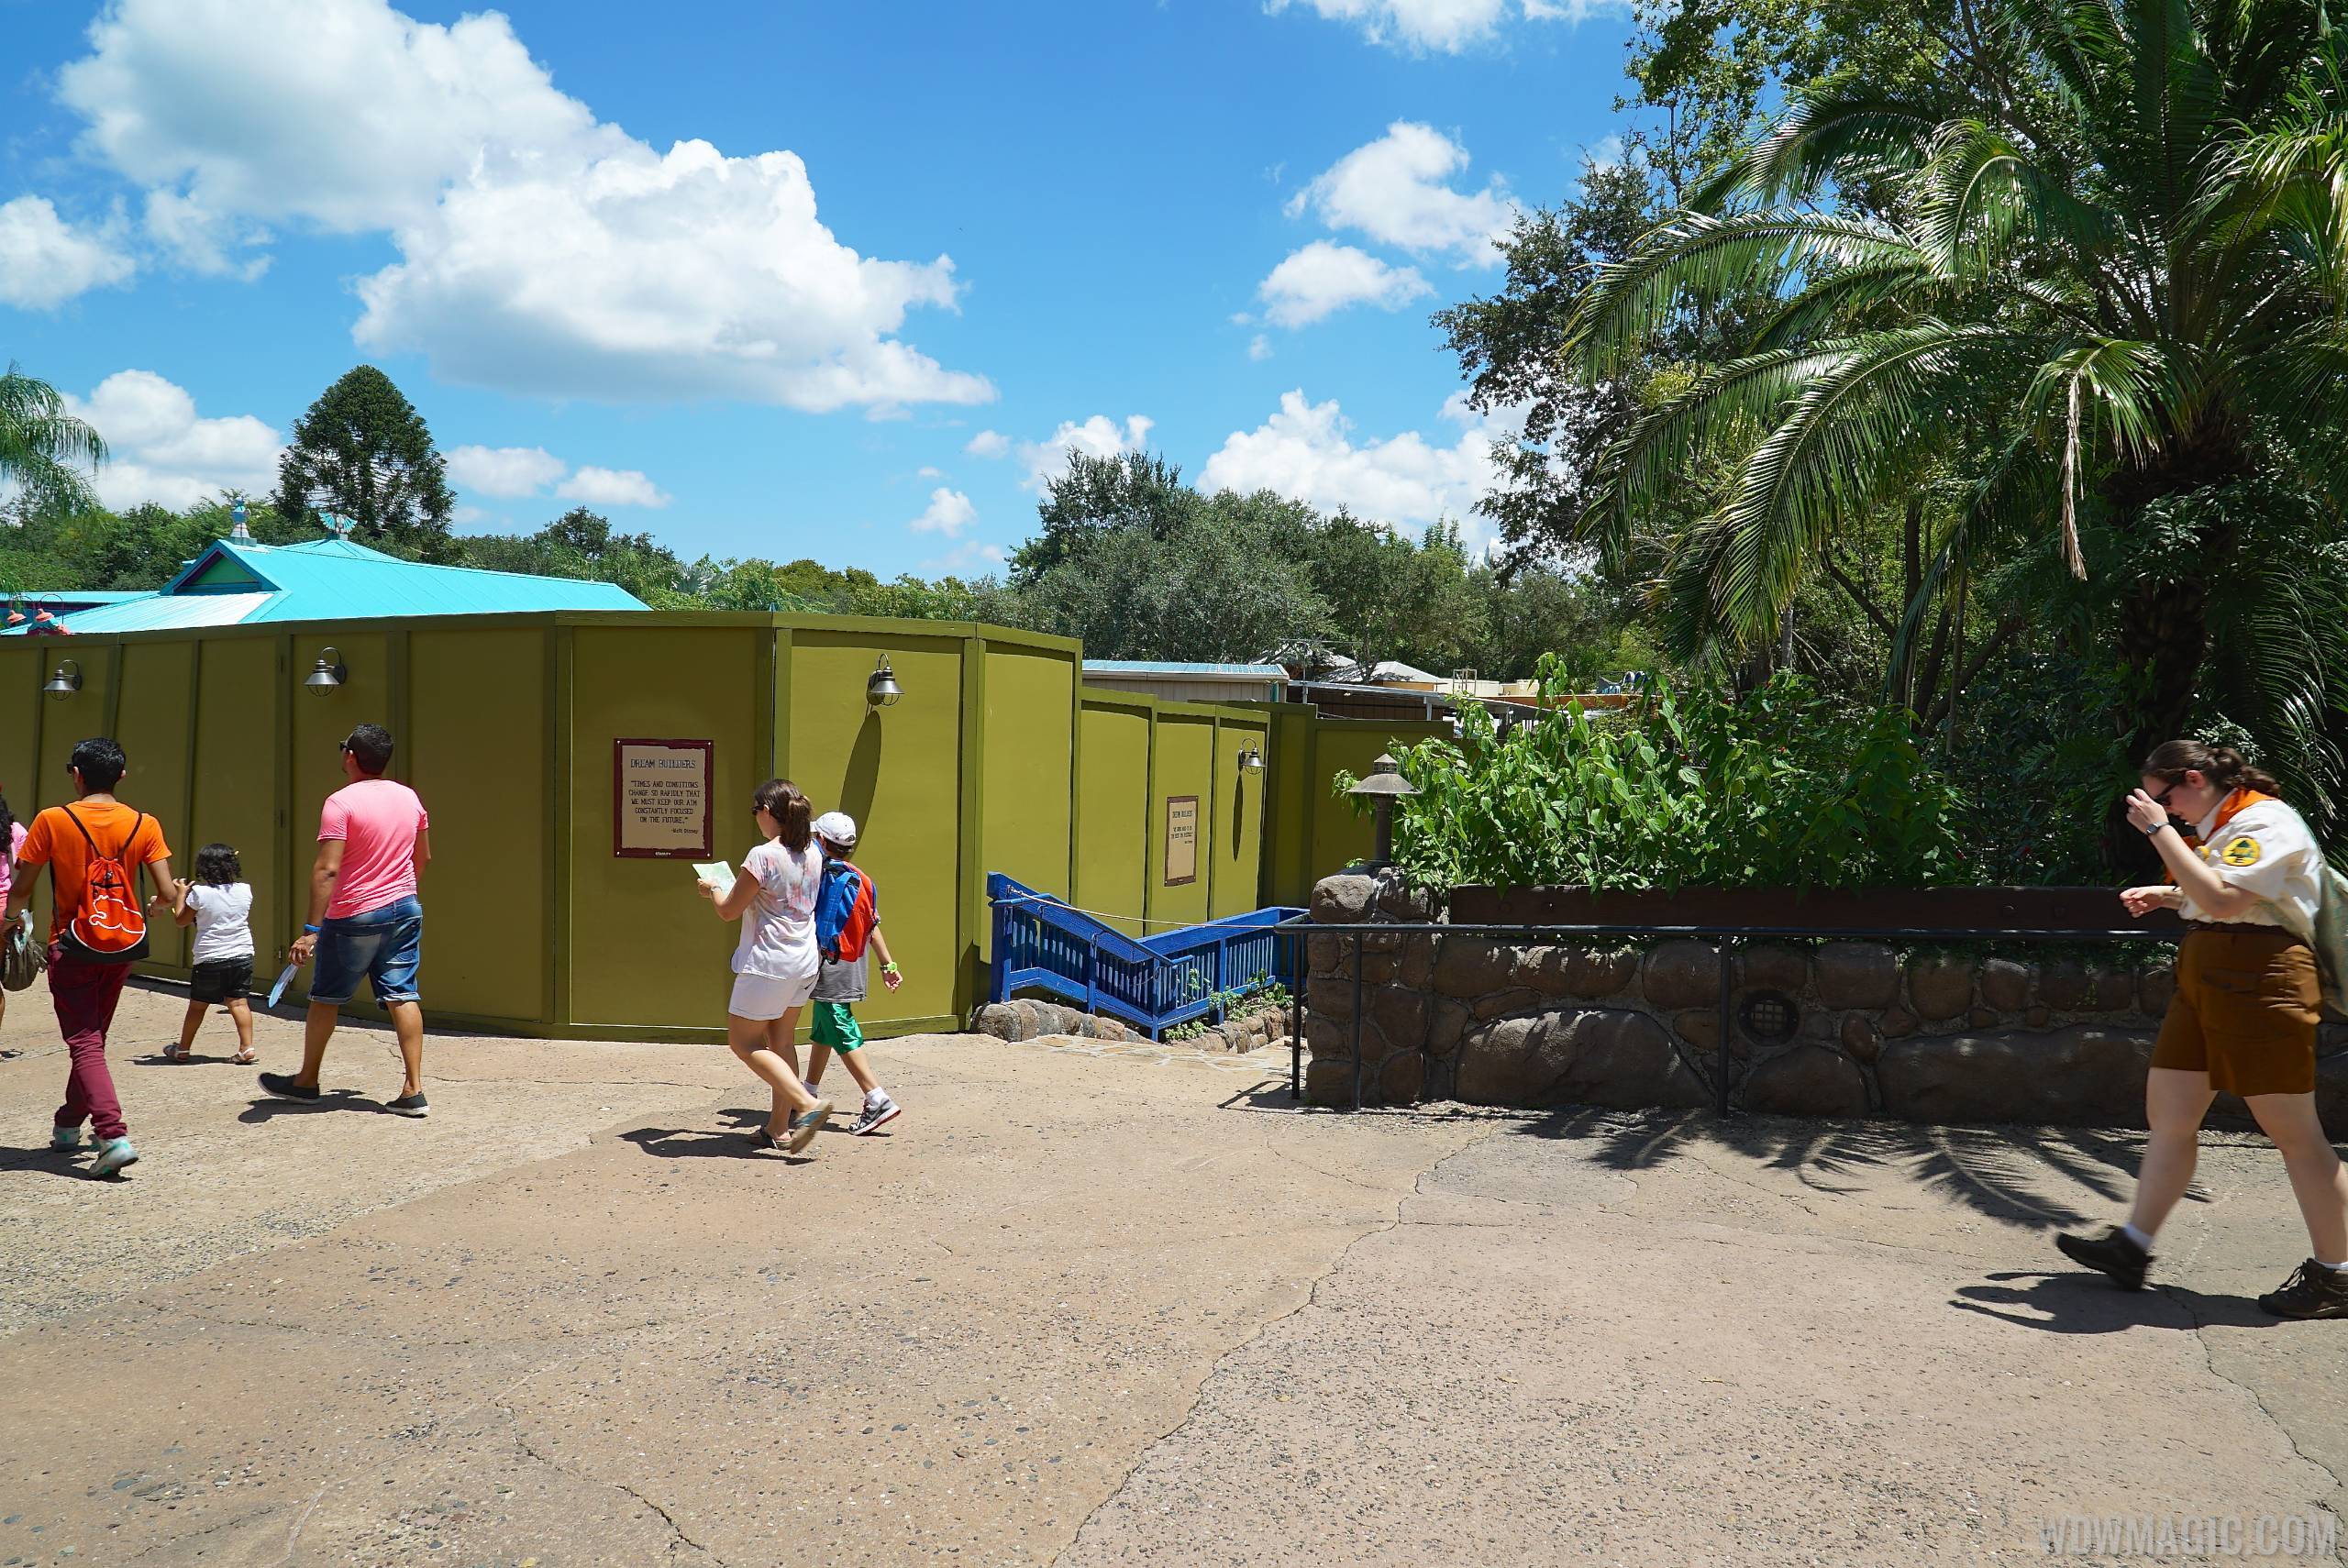 Discovery Island expansion